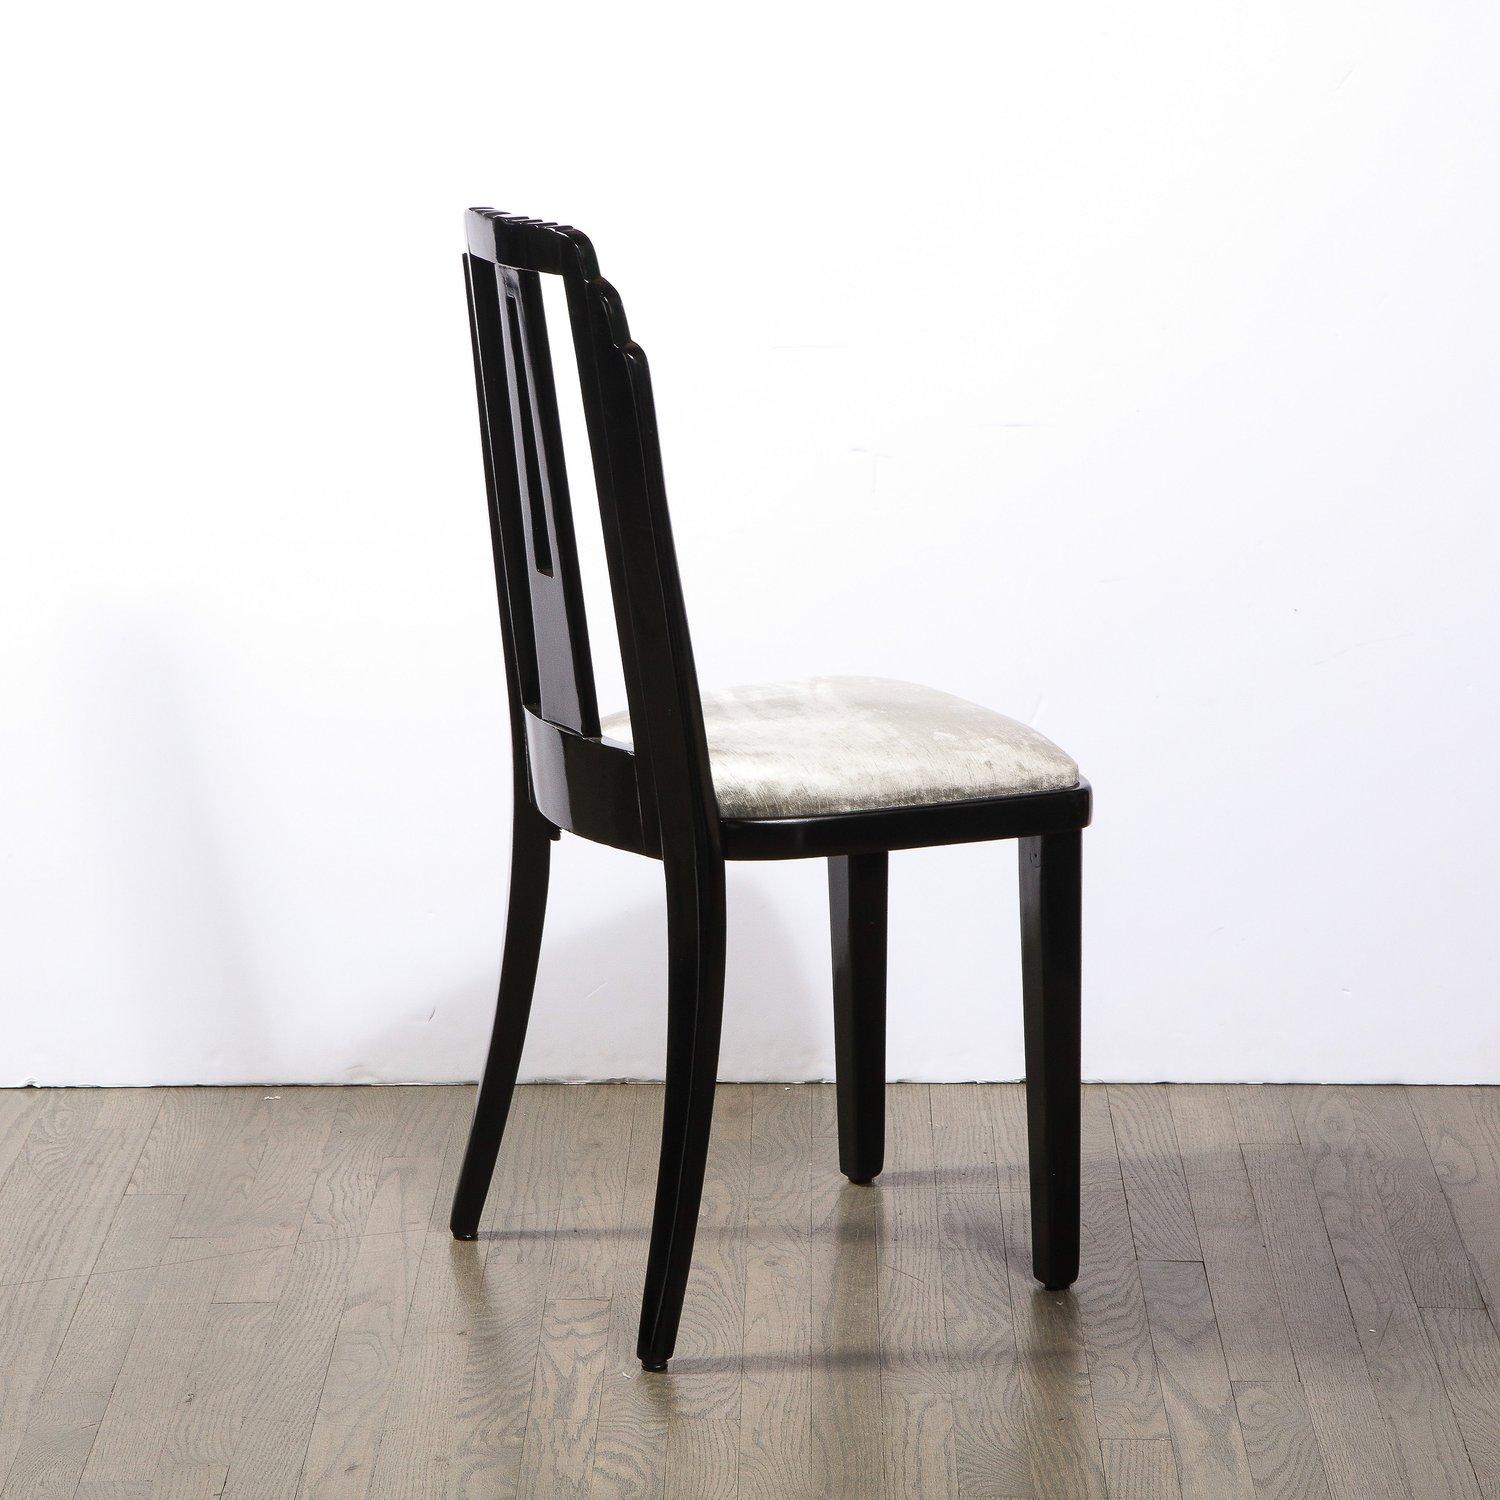 Art Deco Skyscraper Style Dining Chair in Black Lacquer and Smoked Pewter Velvet For Sale 5